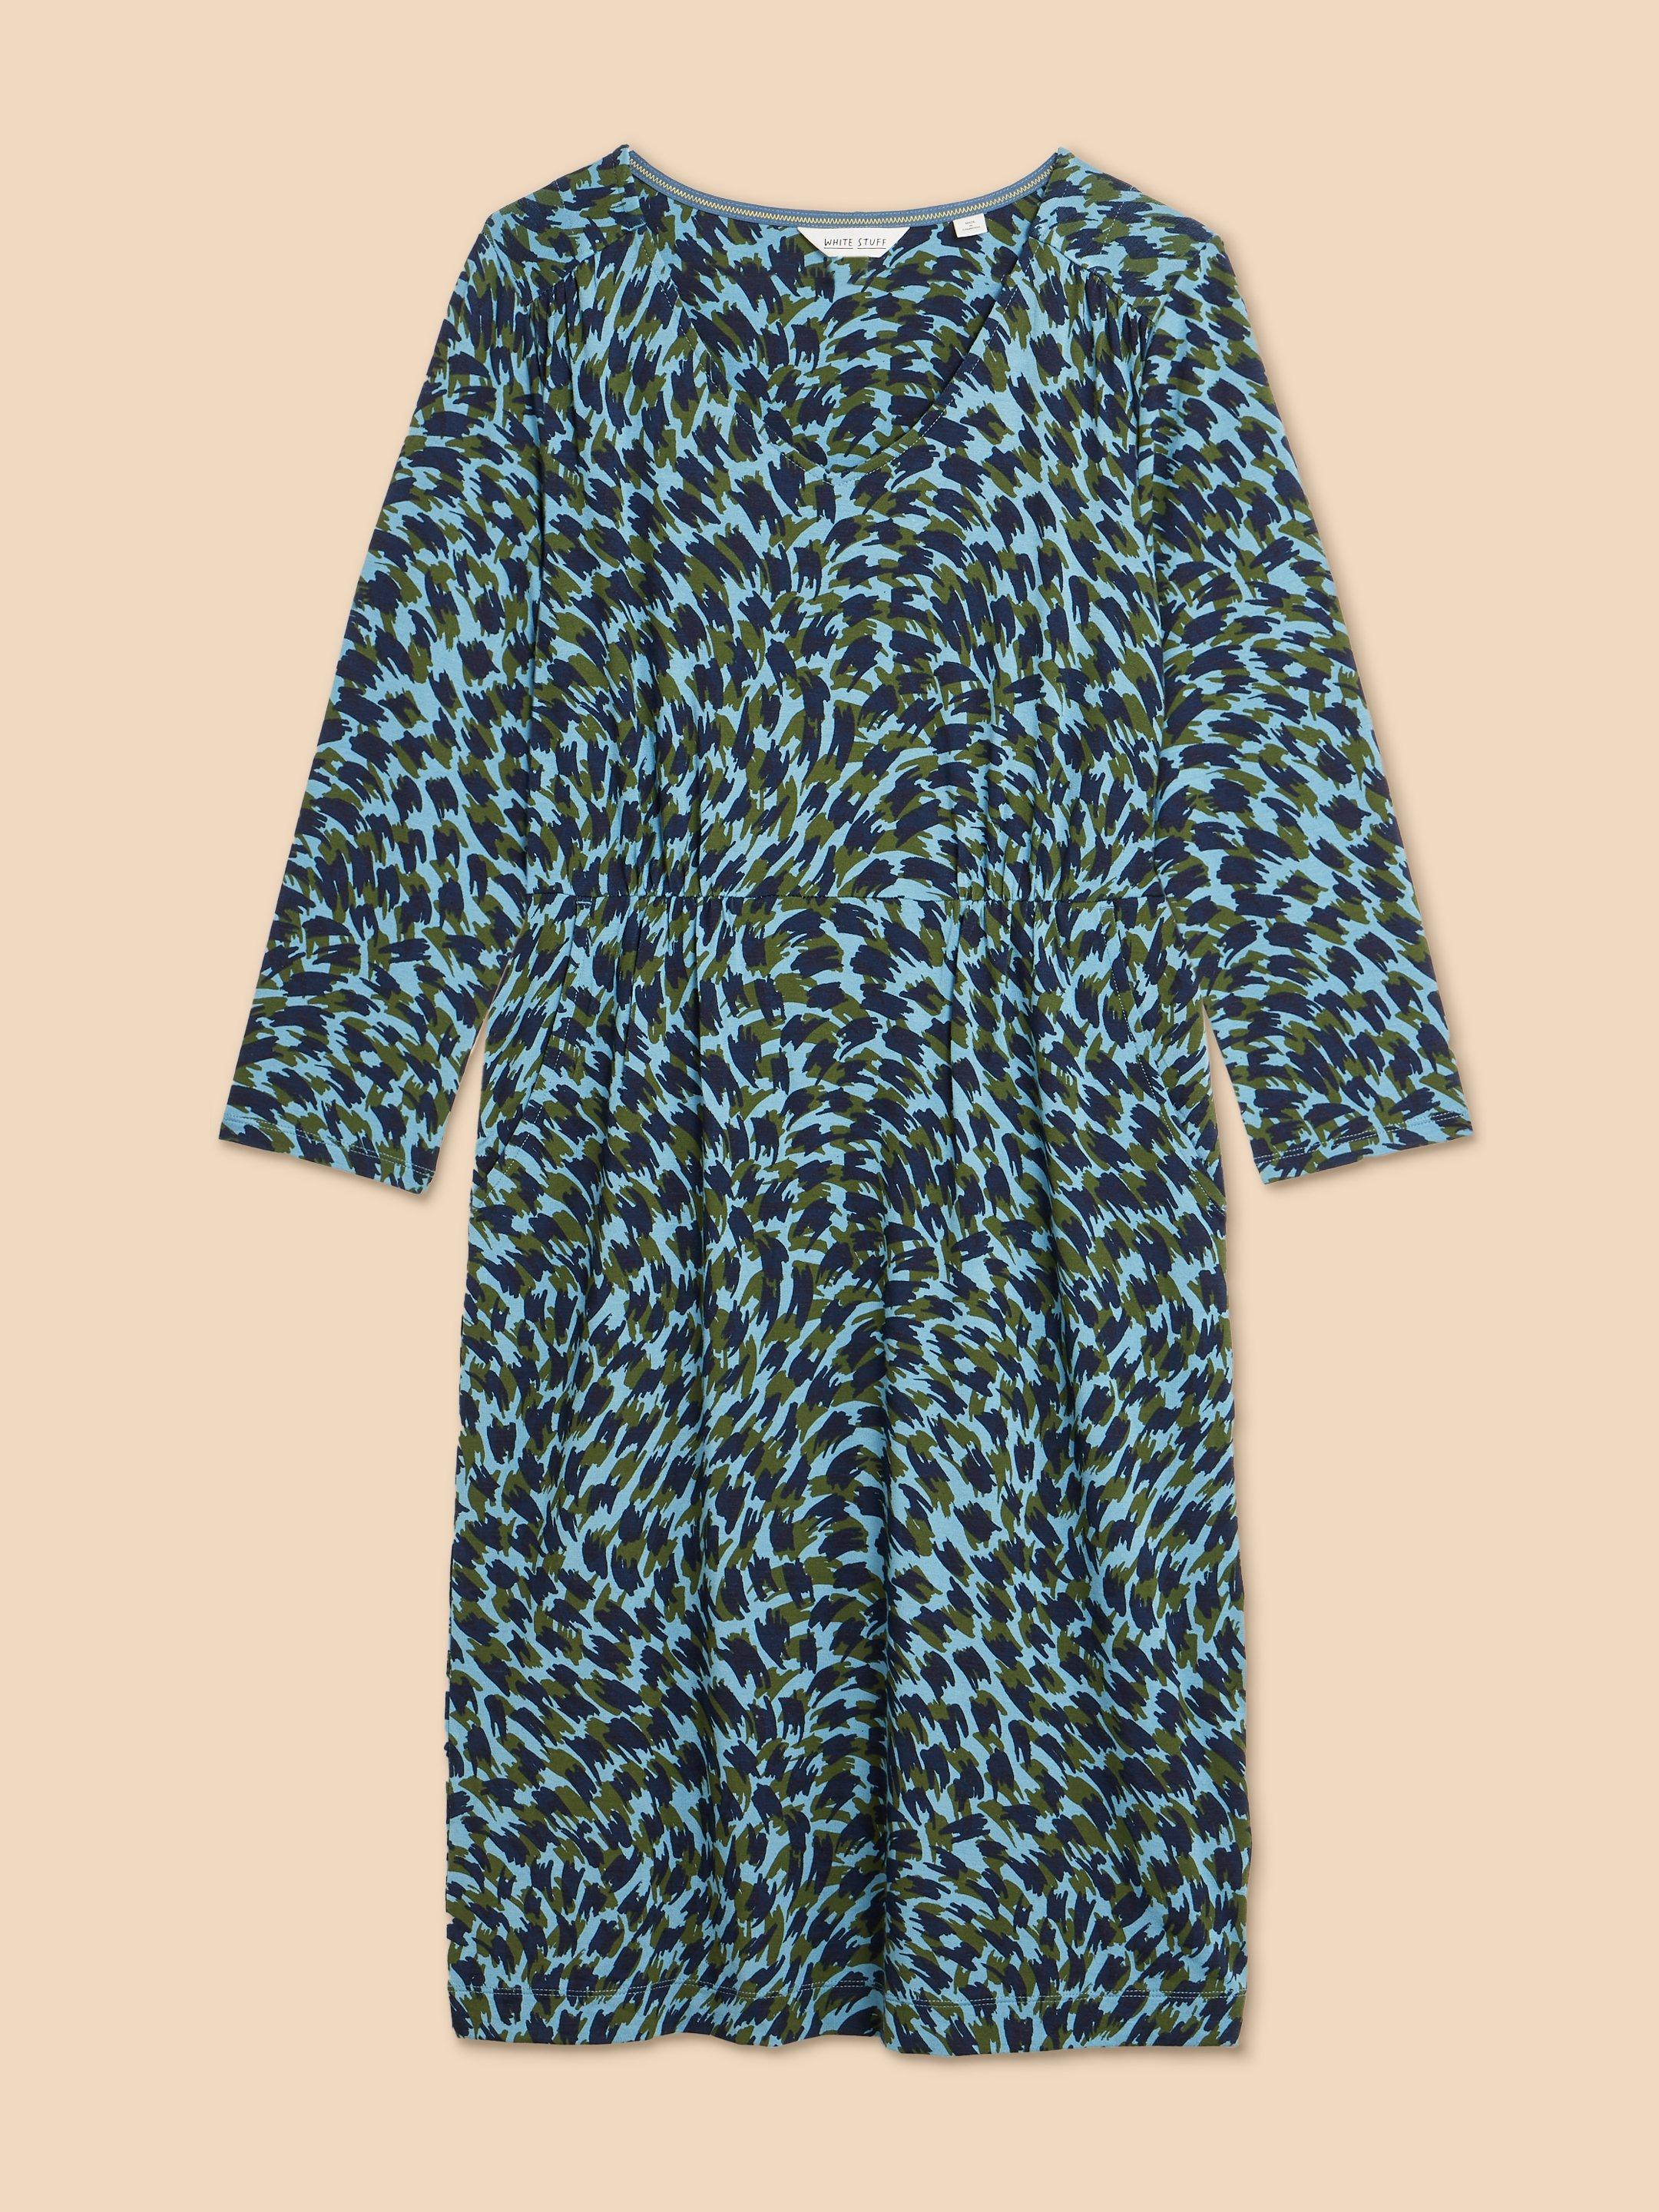 Tallie Printed Dress in TEAL PR - FLAT FRONT